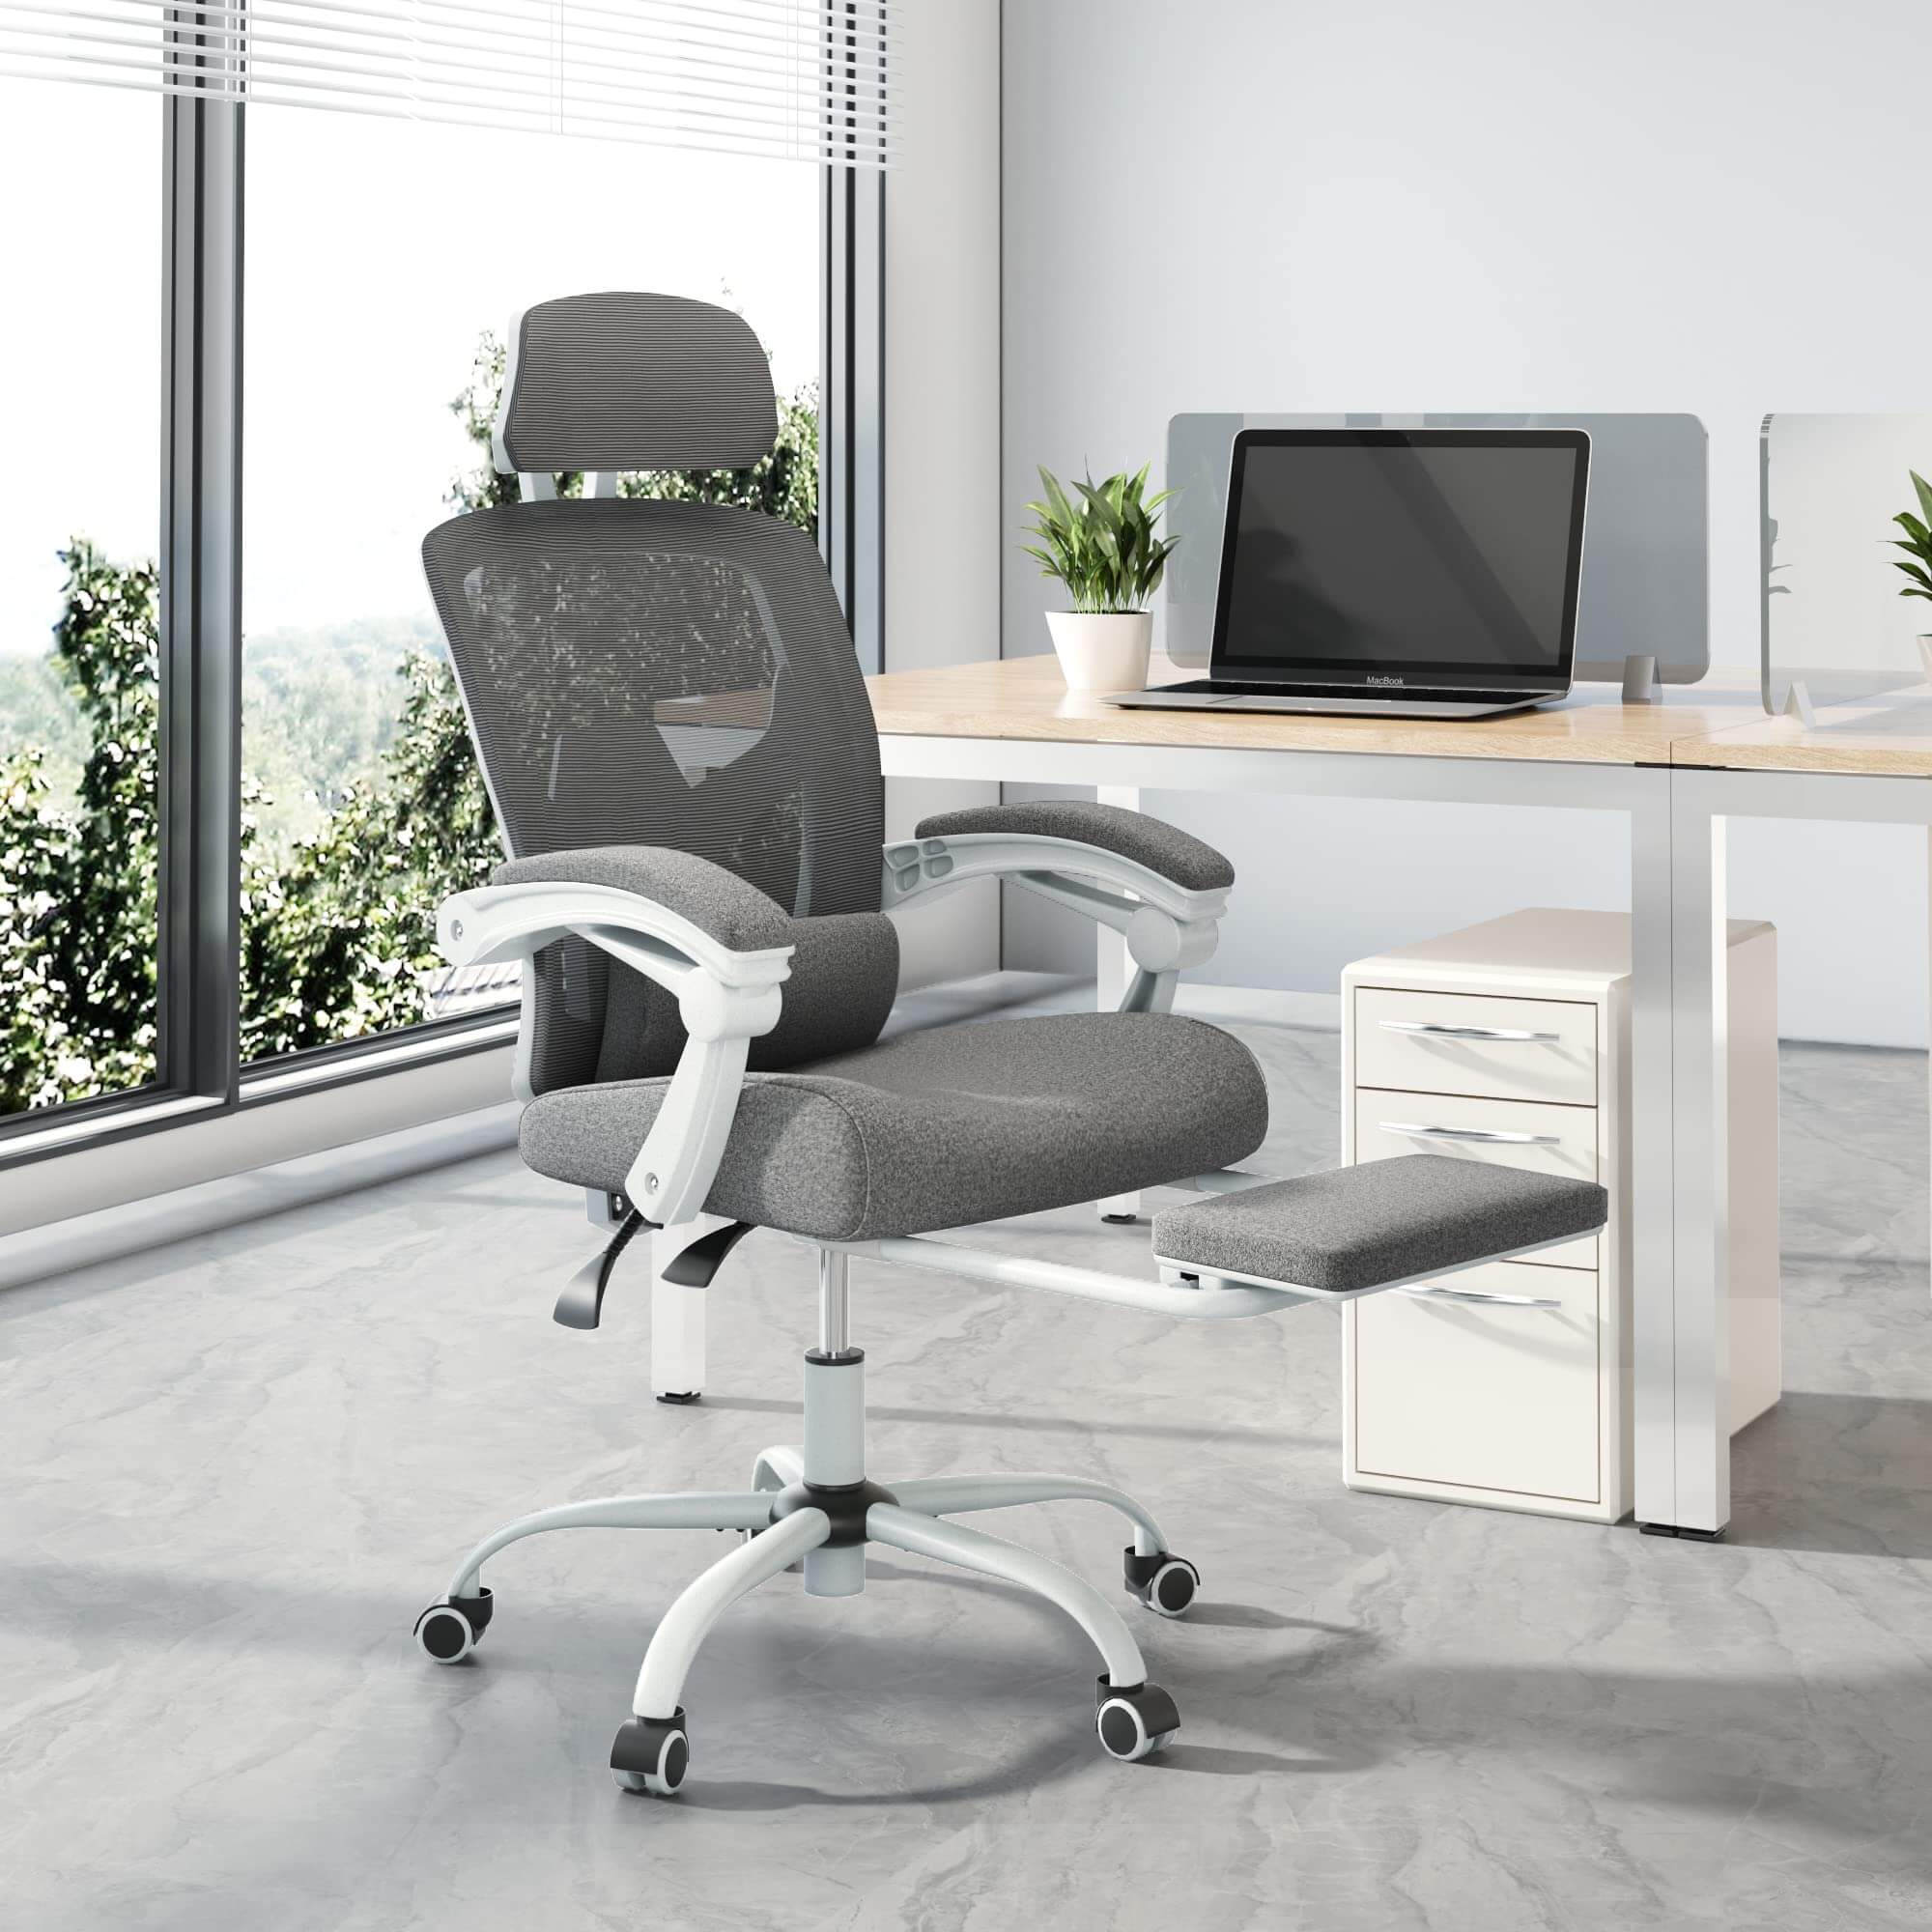 Retractable Footrest Ergonomic Swivel Office Chair with Lumbar Support  Pillow and Padded Armrests